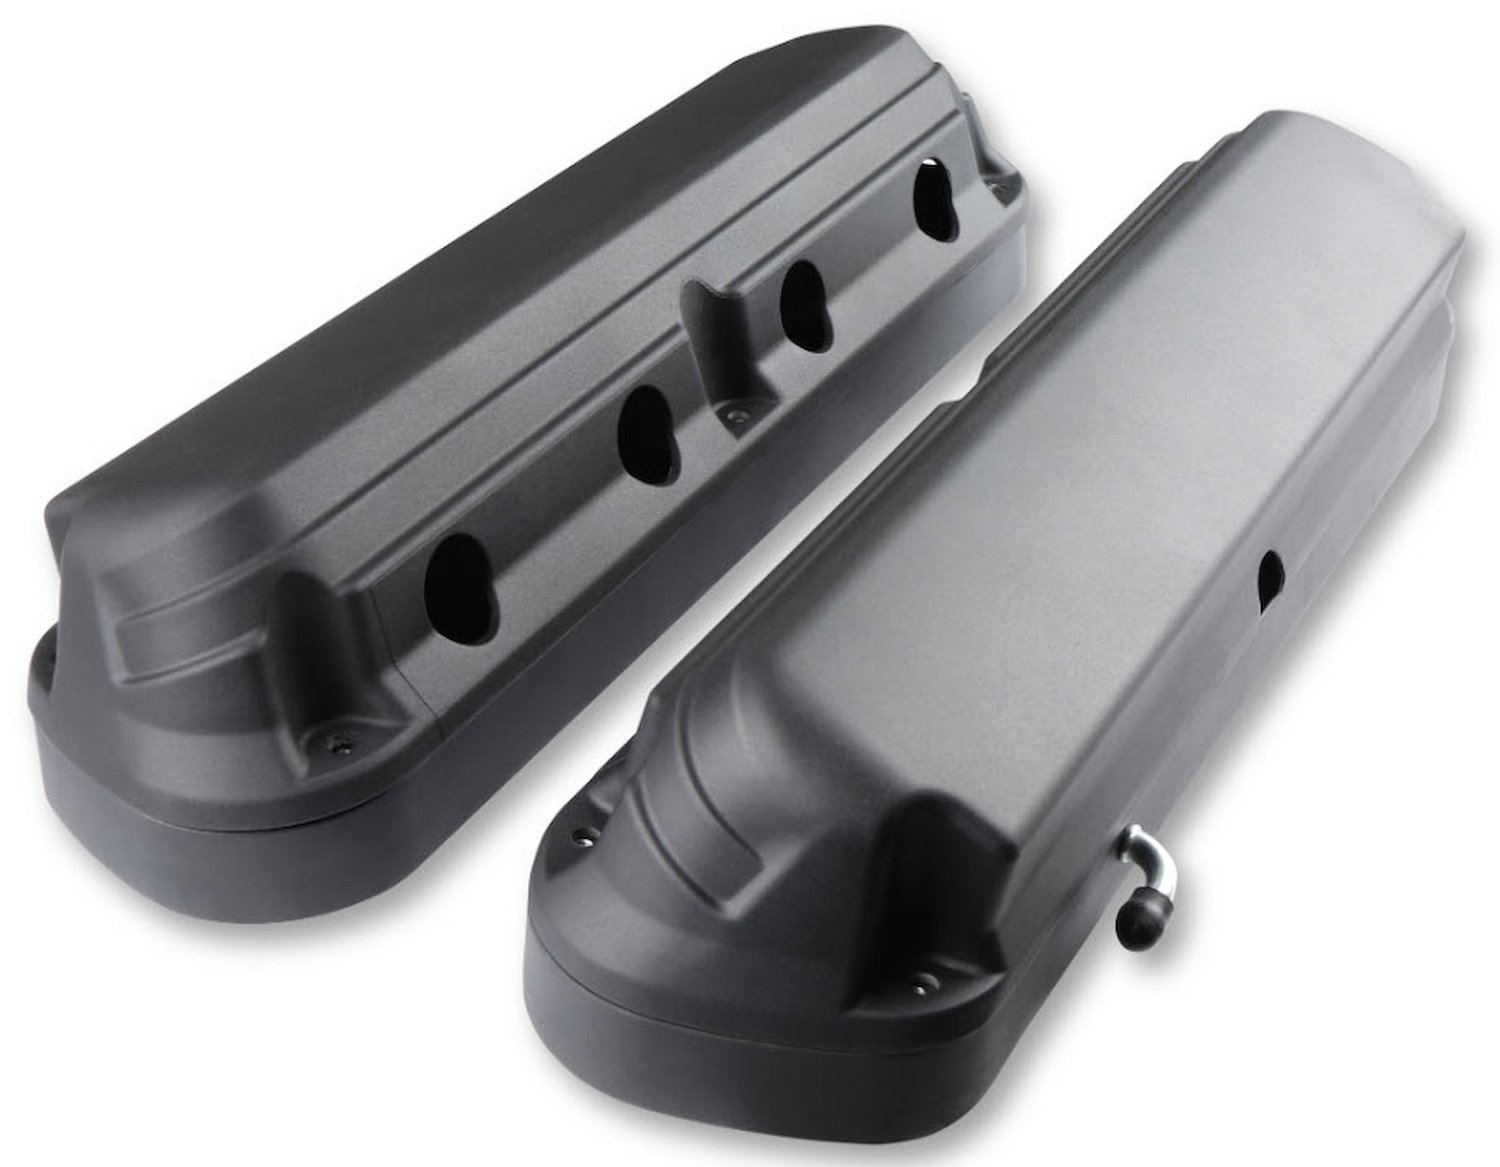 241-186 Ford Fox Body  Mustang-Style 2-Piece Cast-Aluminum Valve Covers for GM Gen III/IV LS Engines [Black Finish]